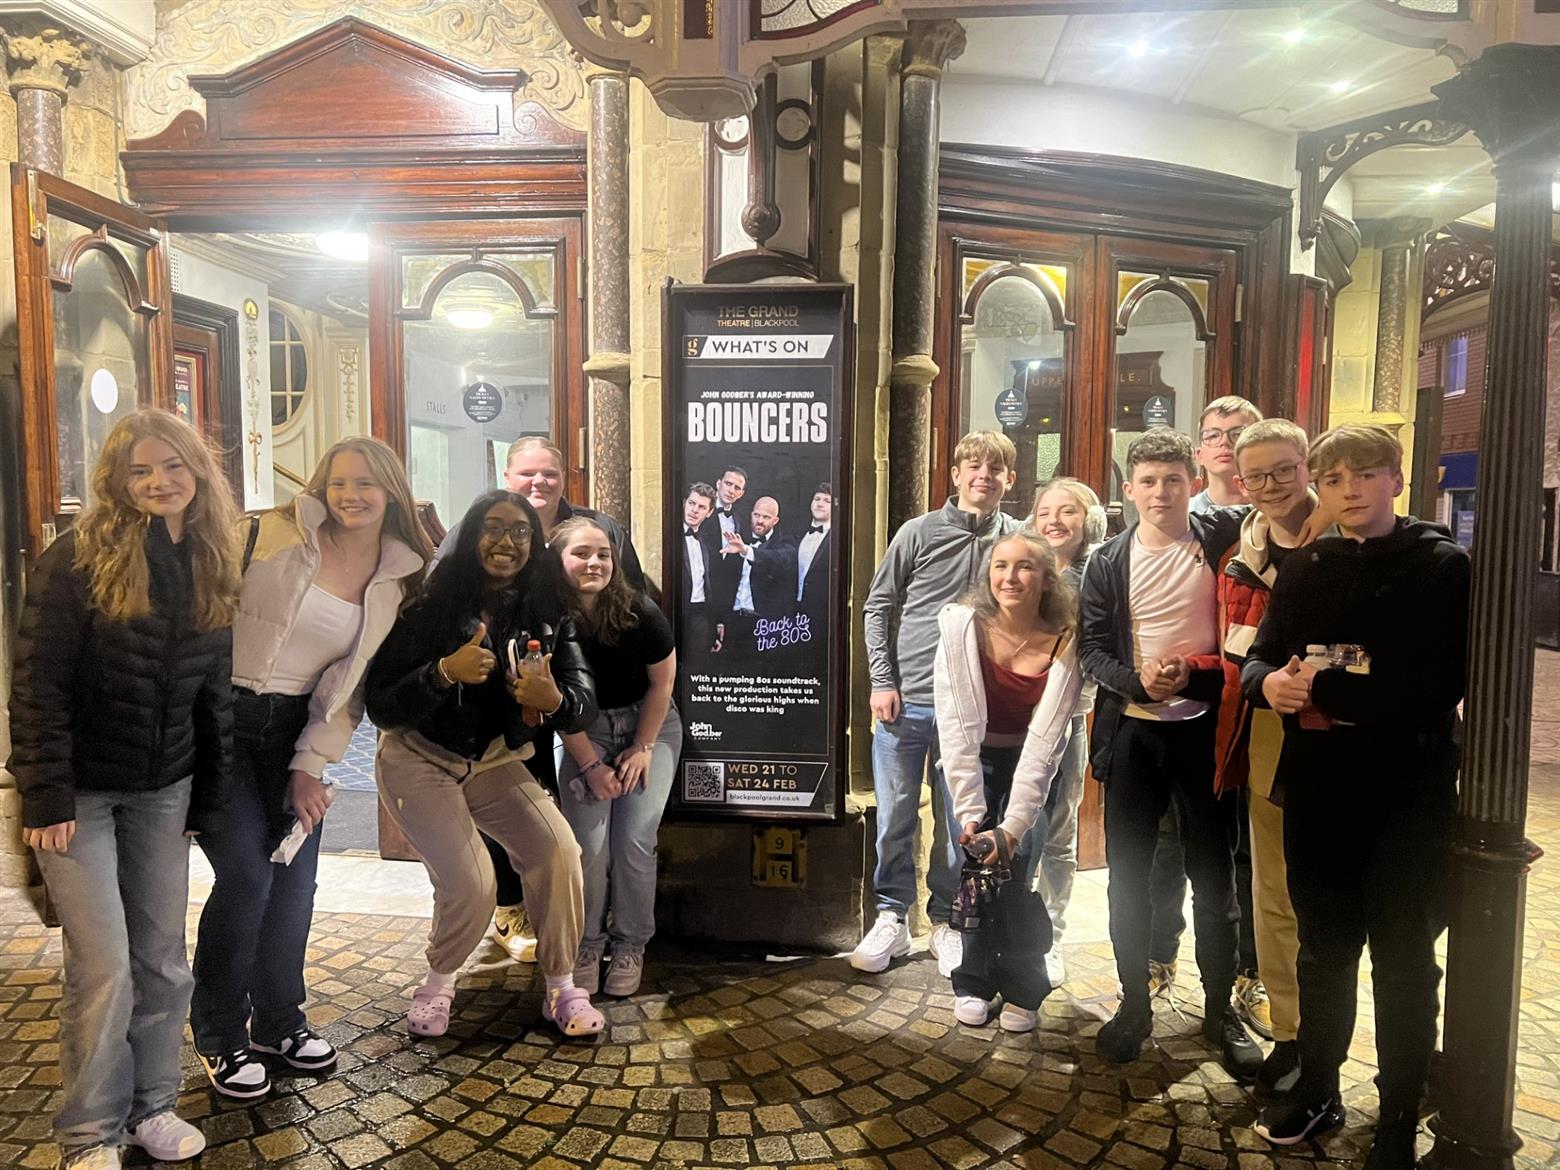 Review of "Bouncers" theatre trip by Isla, Year 10